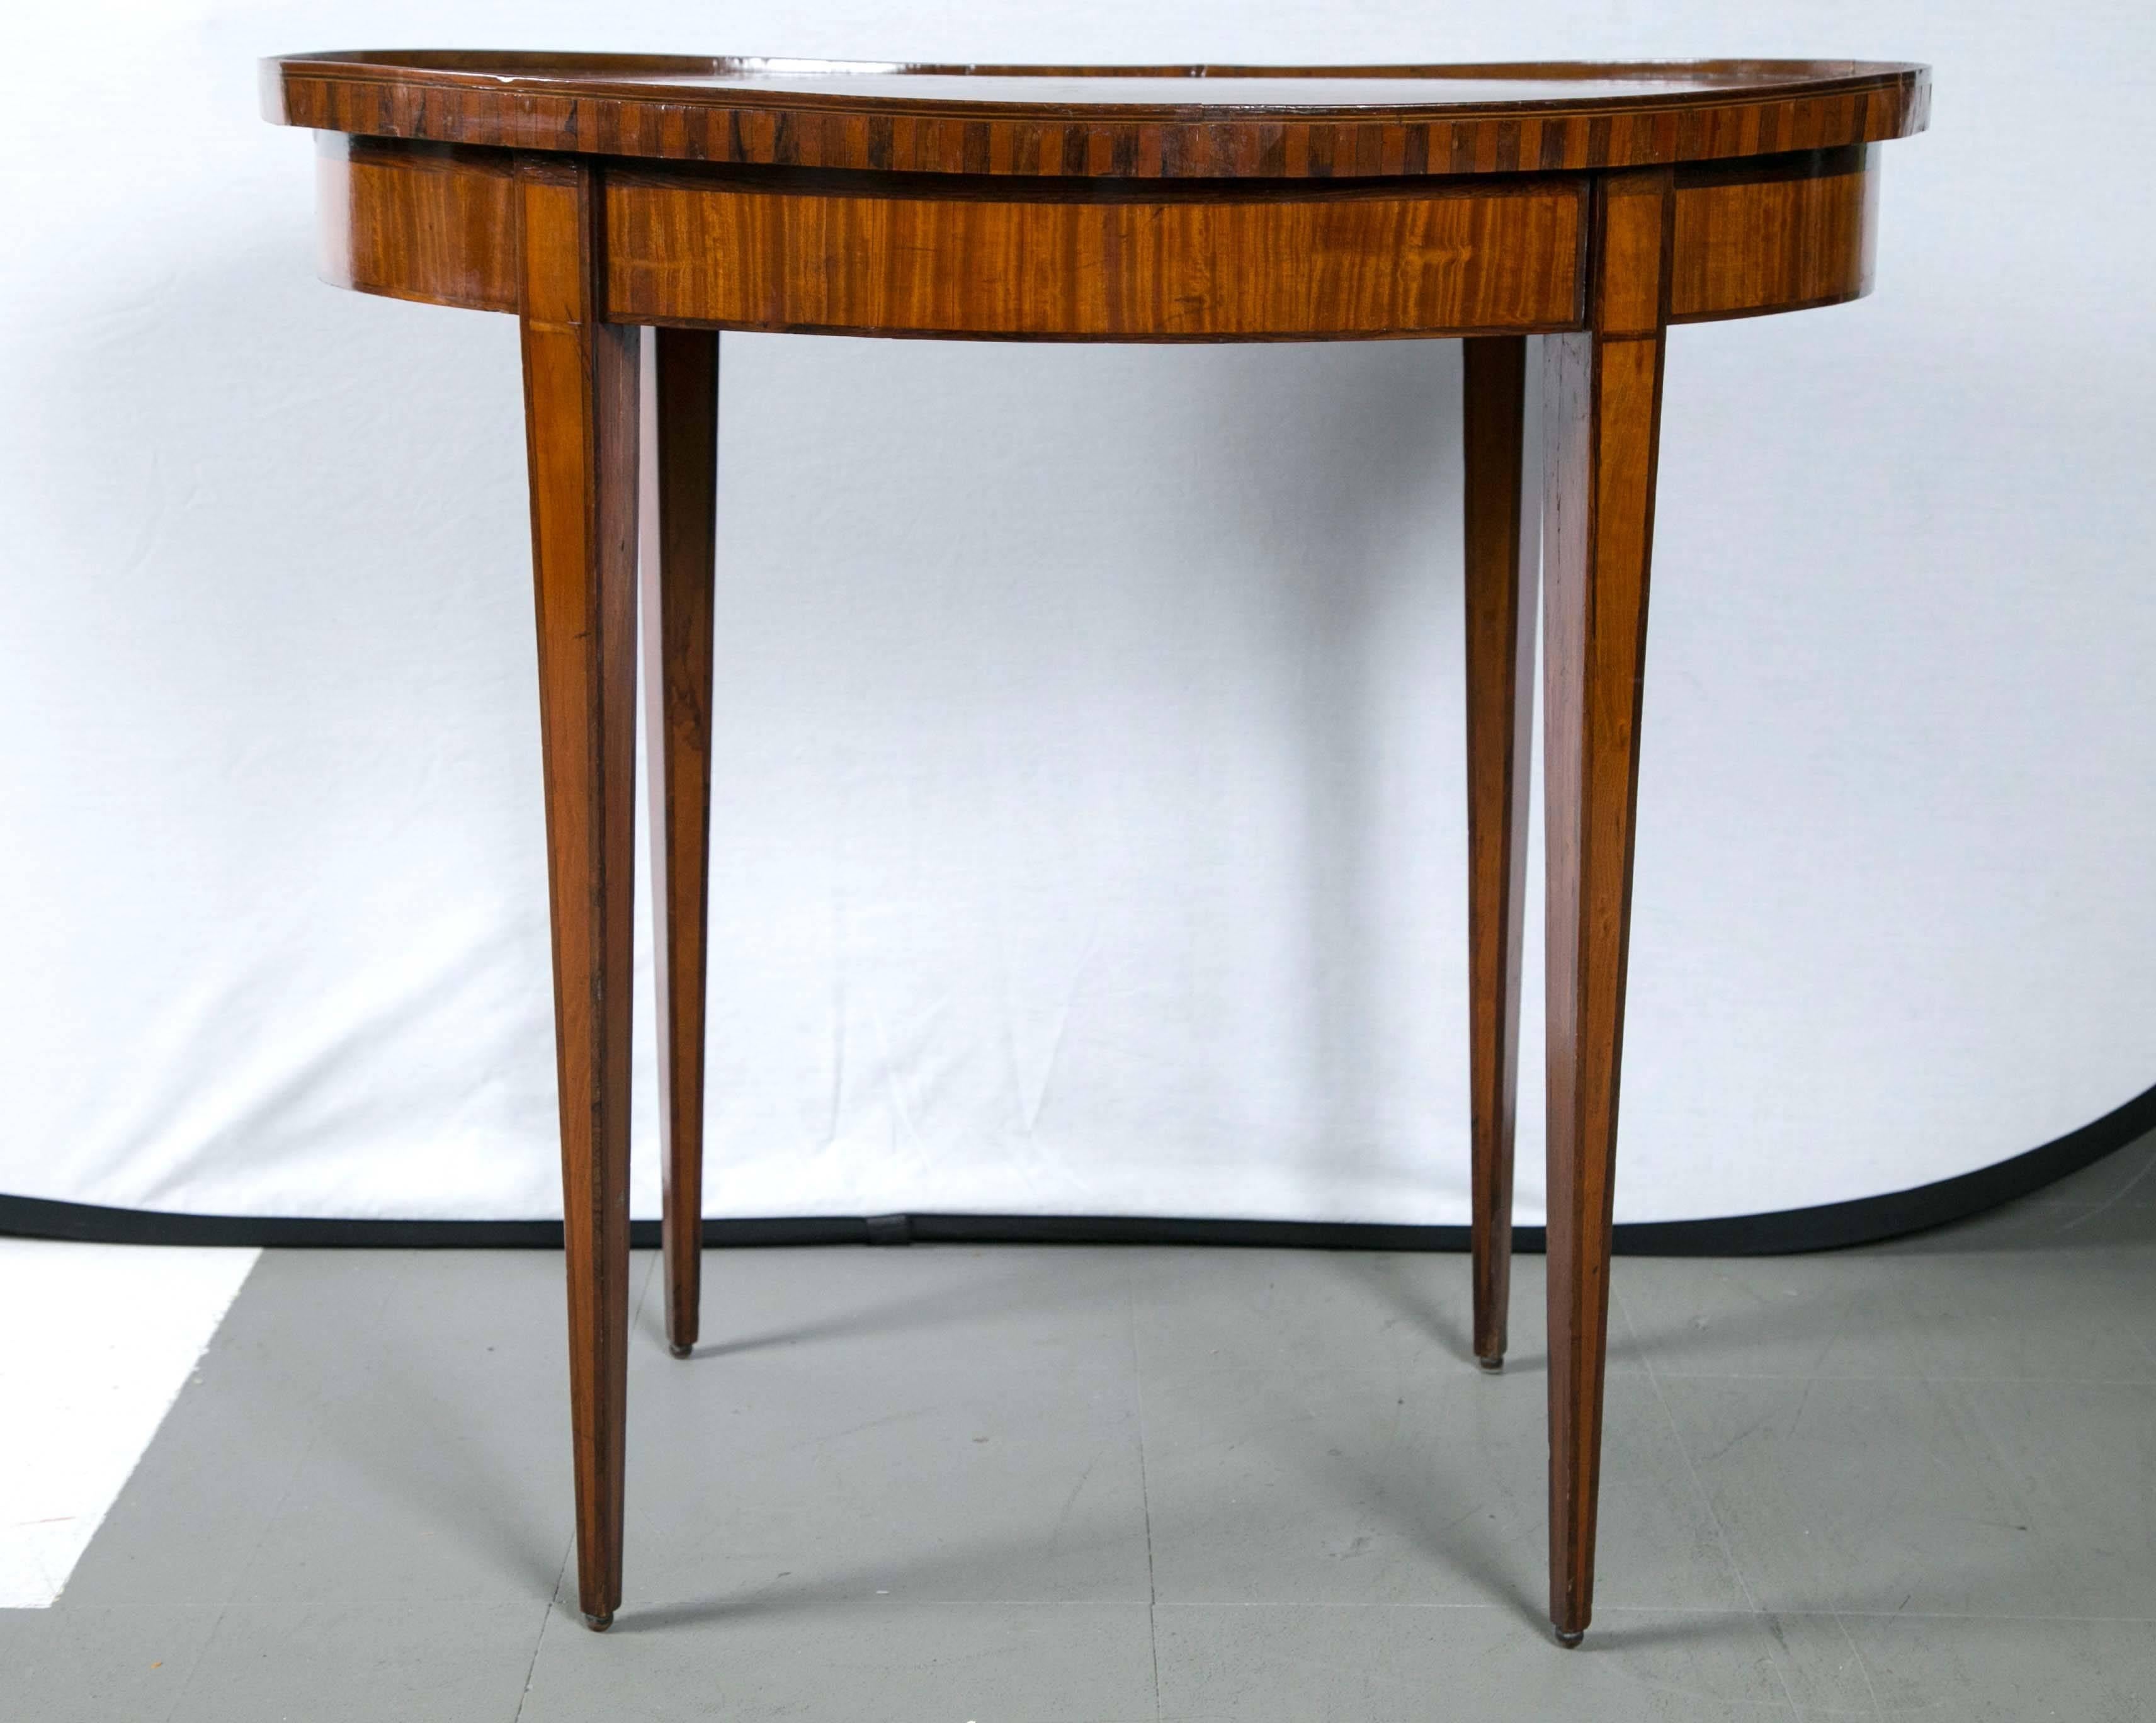 Lovely Adams style oval table just the perfect size.